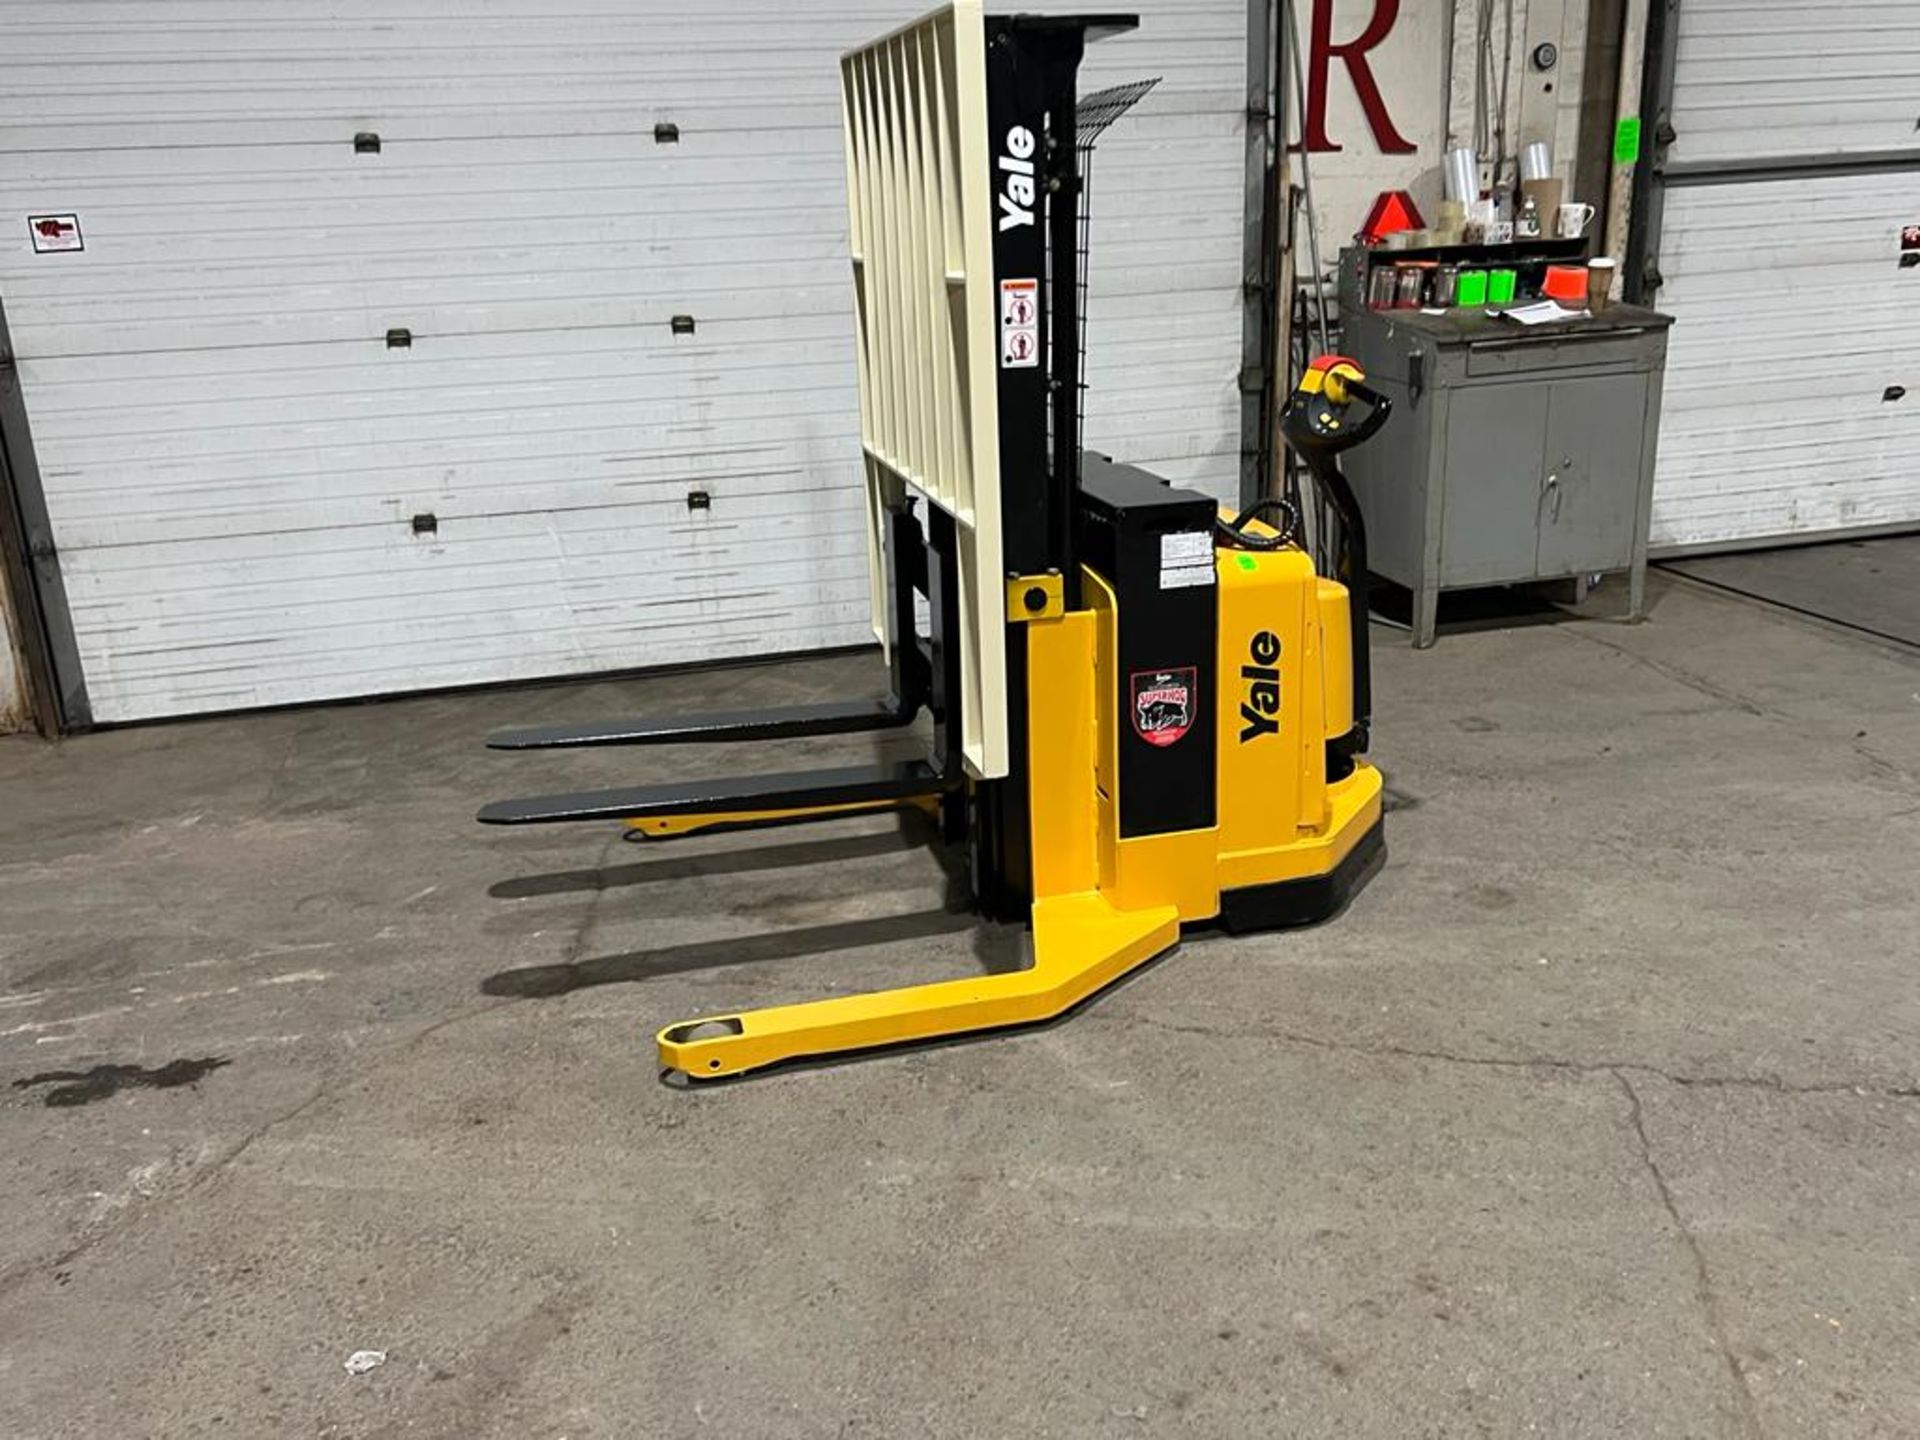 2010 Yale Pallet Stacker Walk Behind 4,000lbs capacity electric Powered Pallet Cart 24V with 3-Stage